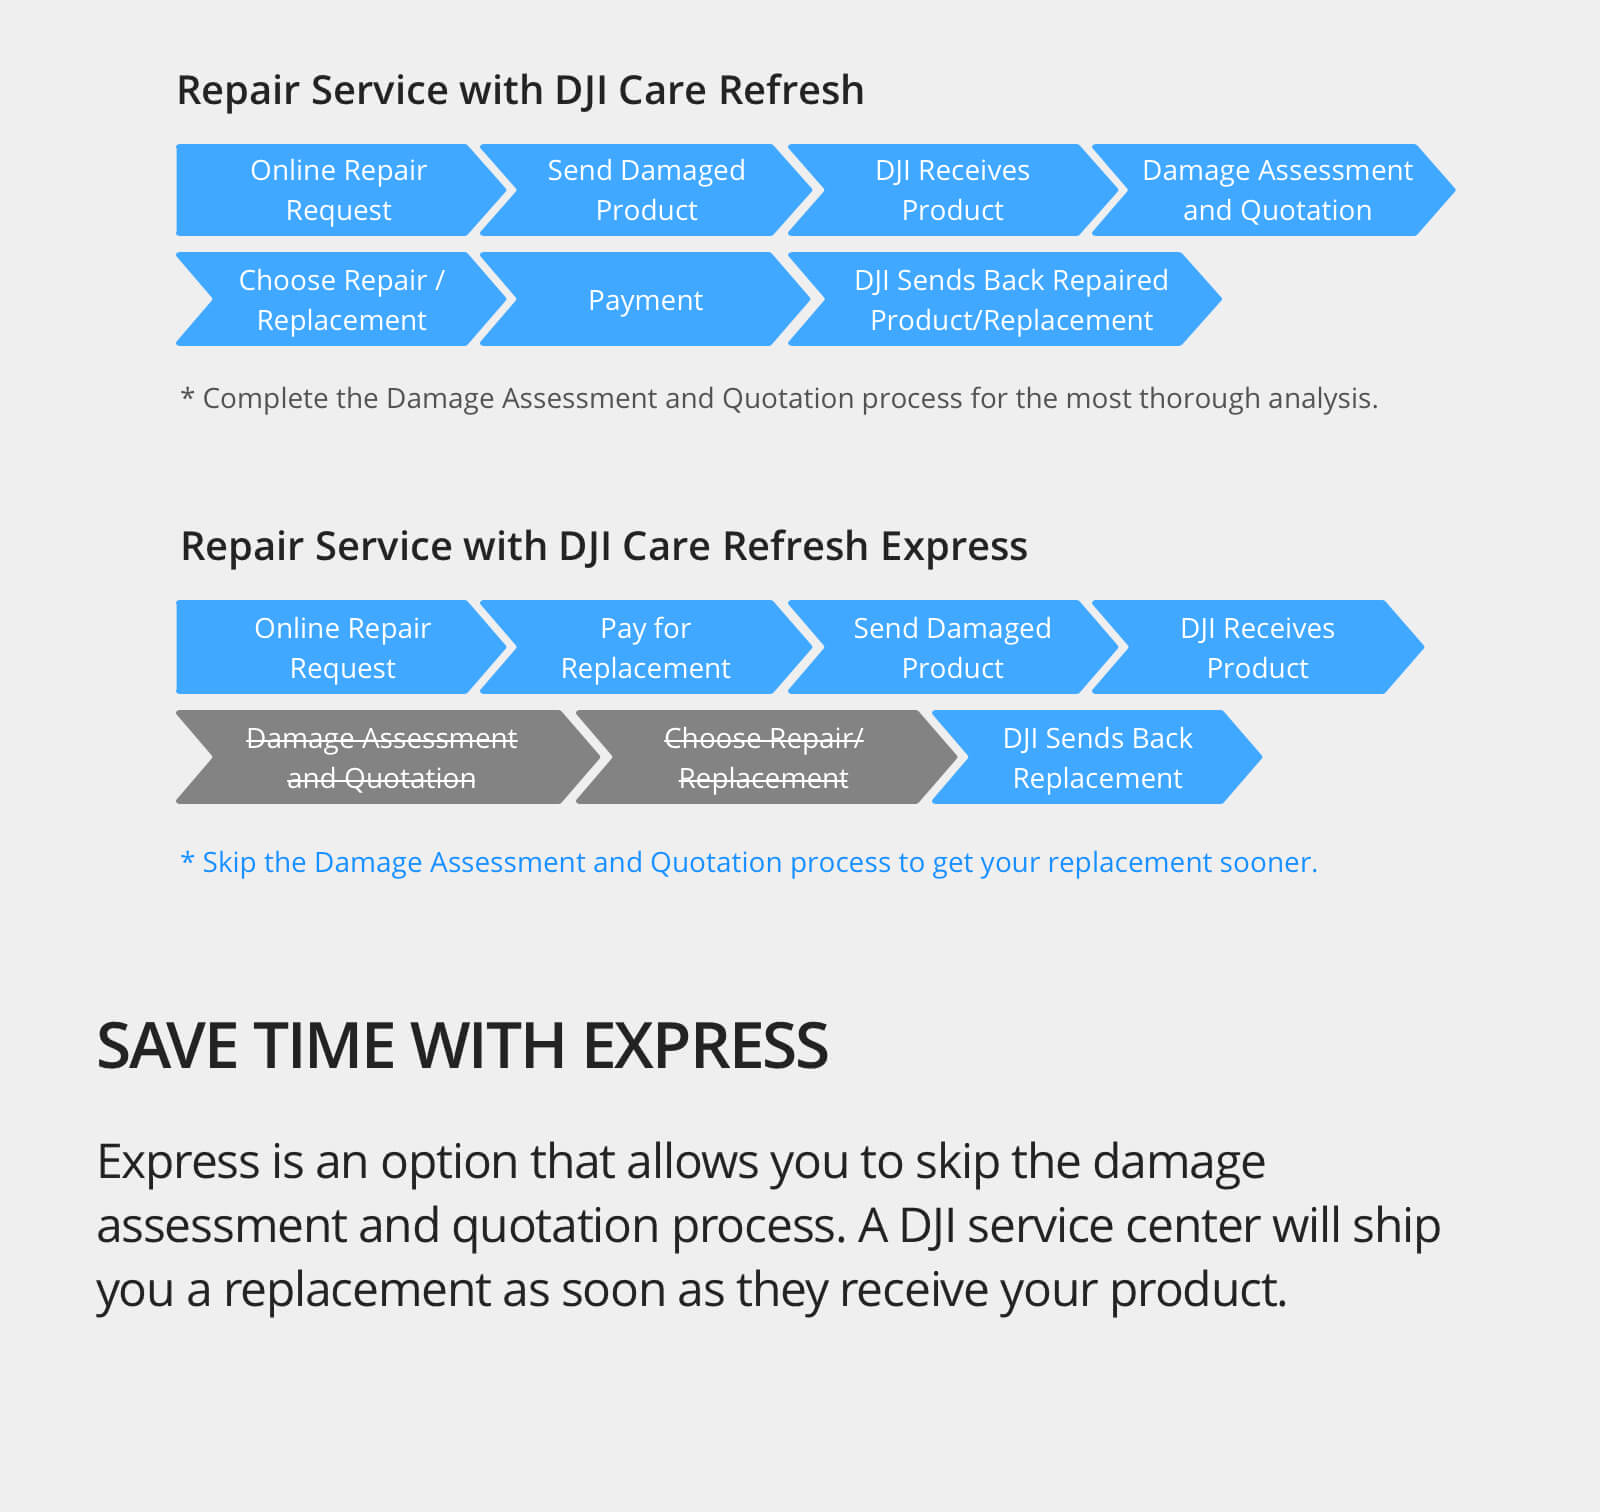 DJI Care Refresh - extended Warrantee and Accidental Damage Protection. DJI Florida Drone Supply DJI Care Refresh - extended Warrantee and Accidental Damage Protection.